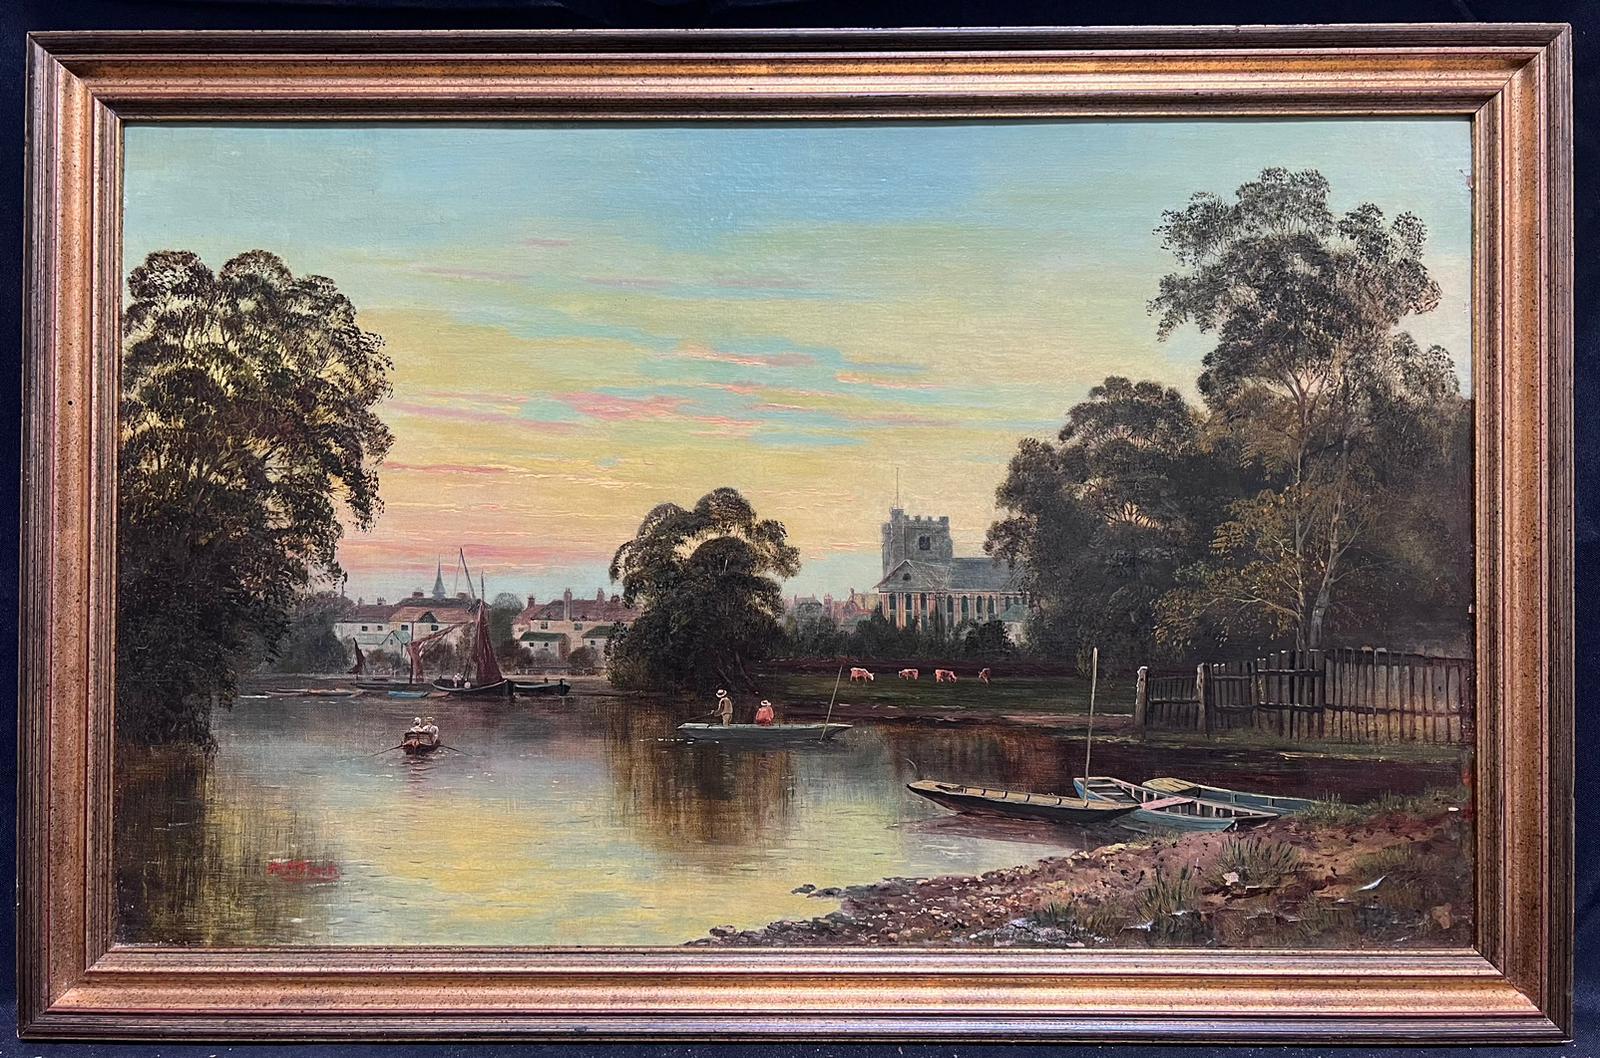 The River Thames at Eton/ Windsor
British artist, late 19th century
signed oil on canvas, framed
framed: 18.5 x 28.5 inches
canvas: 16.5 x 26 inches
provenance: private collection, UK
condition: very good and sound condition 